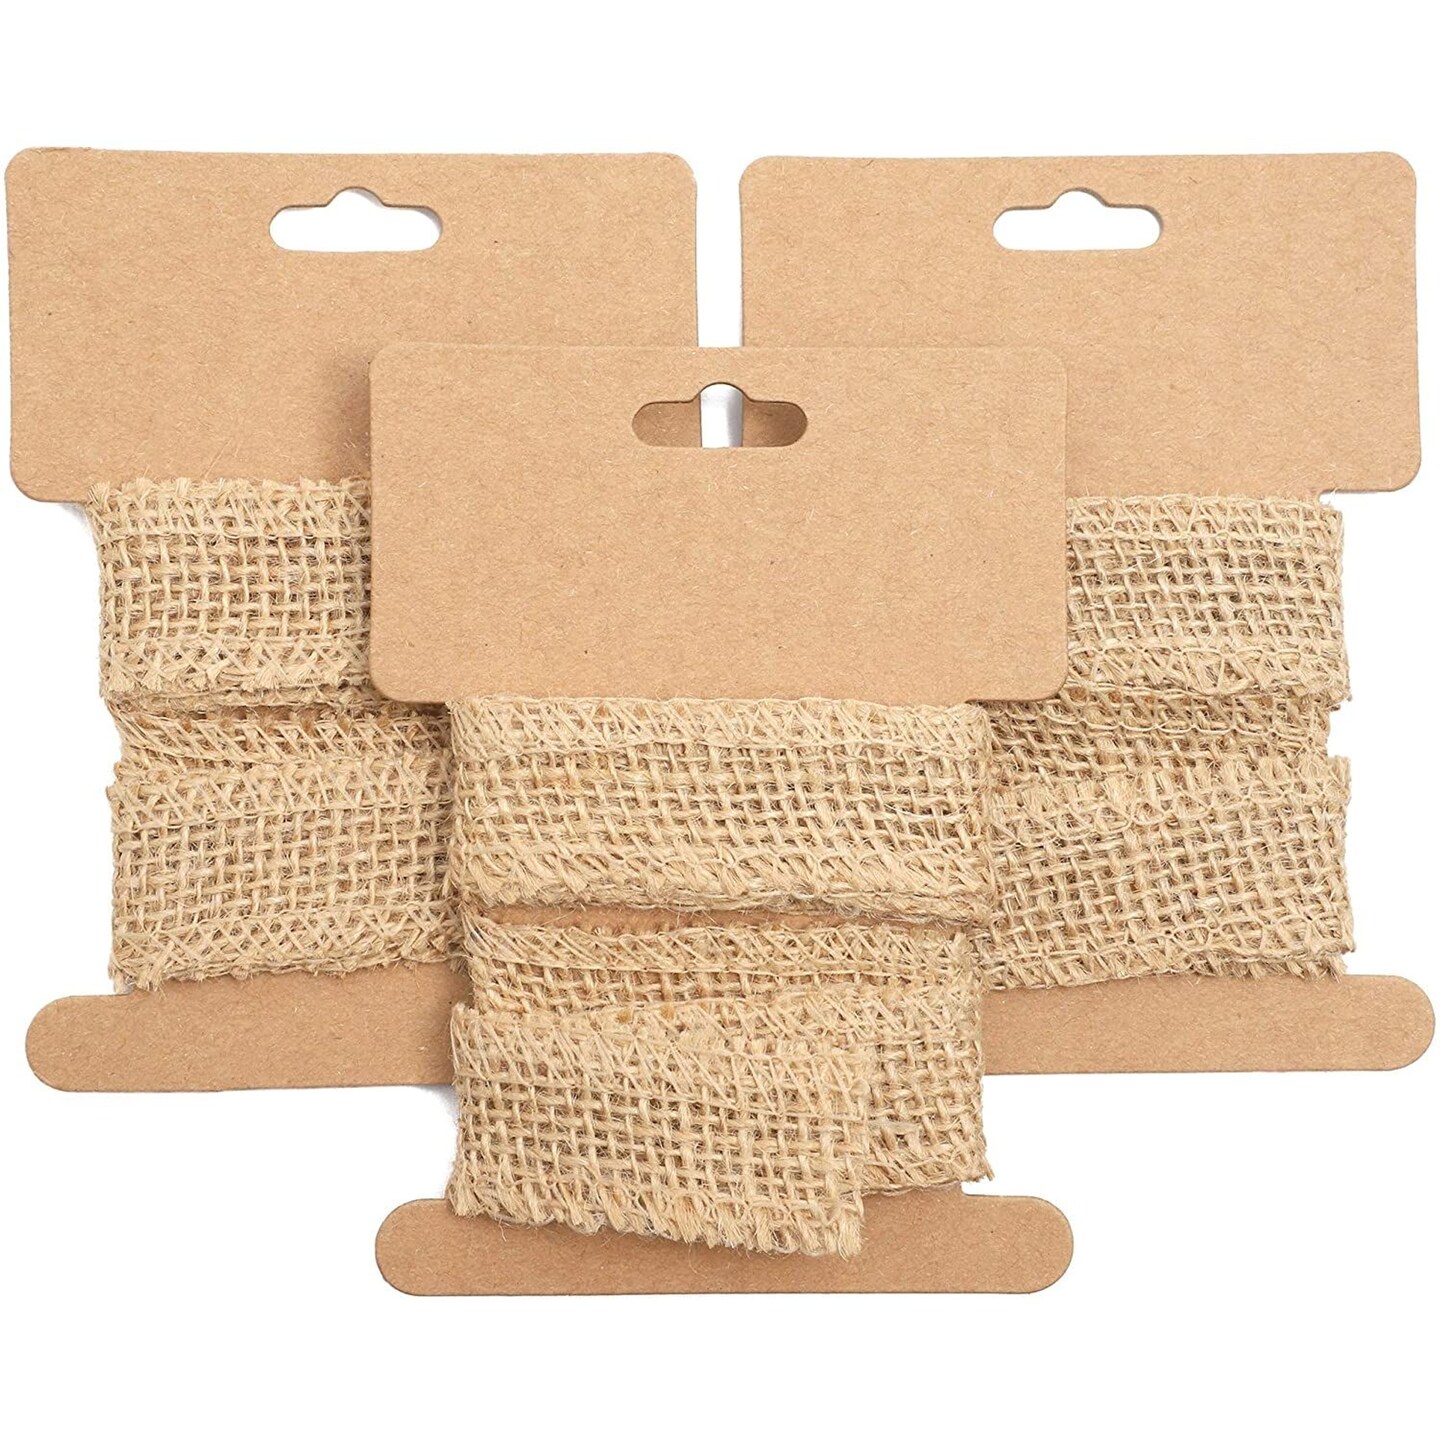 Burlap Ribbon Roll, DIY Crafts and Home Decor (1-Inch Wide, 1.09 Yards, 24-Pack)